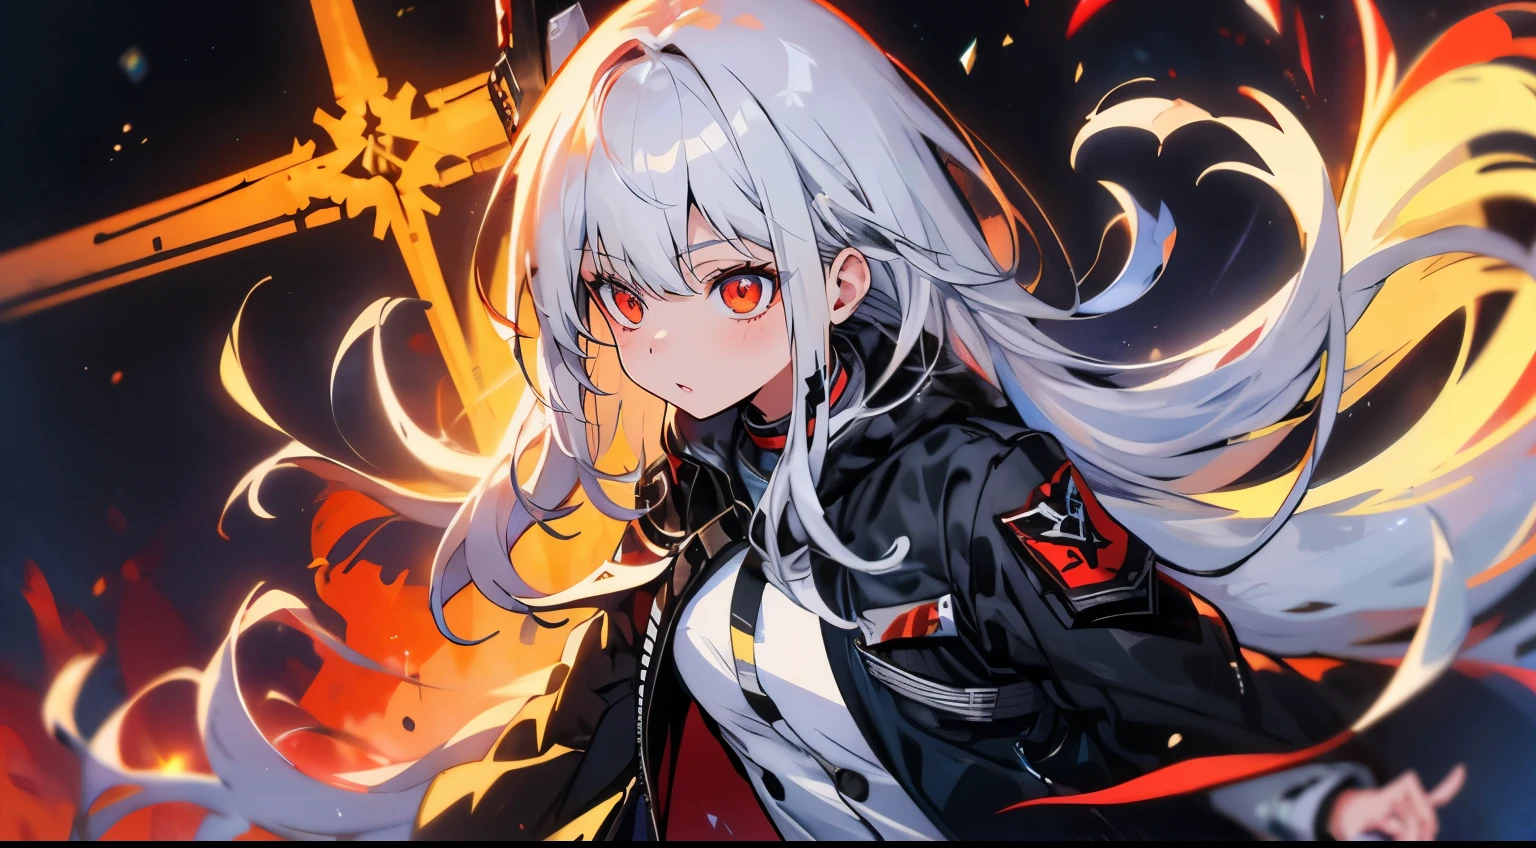 woman with long white hair and black jacket, Best Anime 4K Kona-chan Wallpaper, from girls frontline, girls frontline universe, Azur Lane characters, girls frontline style, girls frontline cg, Ayaka Genshin impact, girls frontline, azur lane style, small details. girls frontline, detailed anime character art, From Arknights